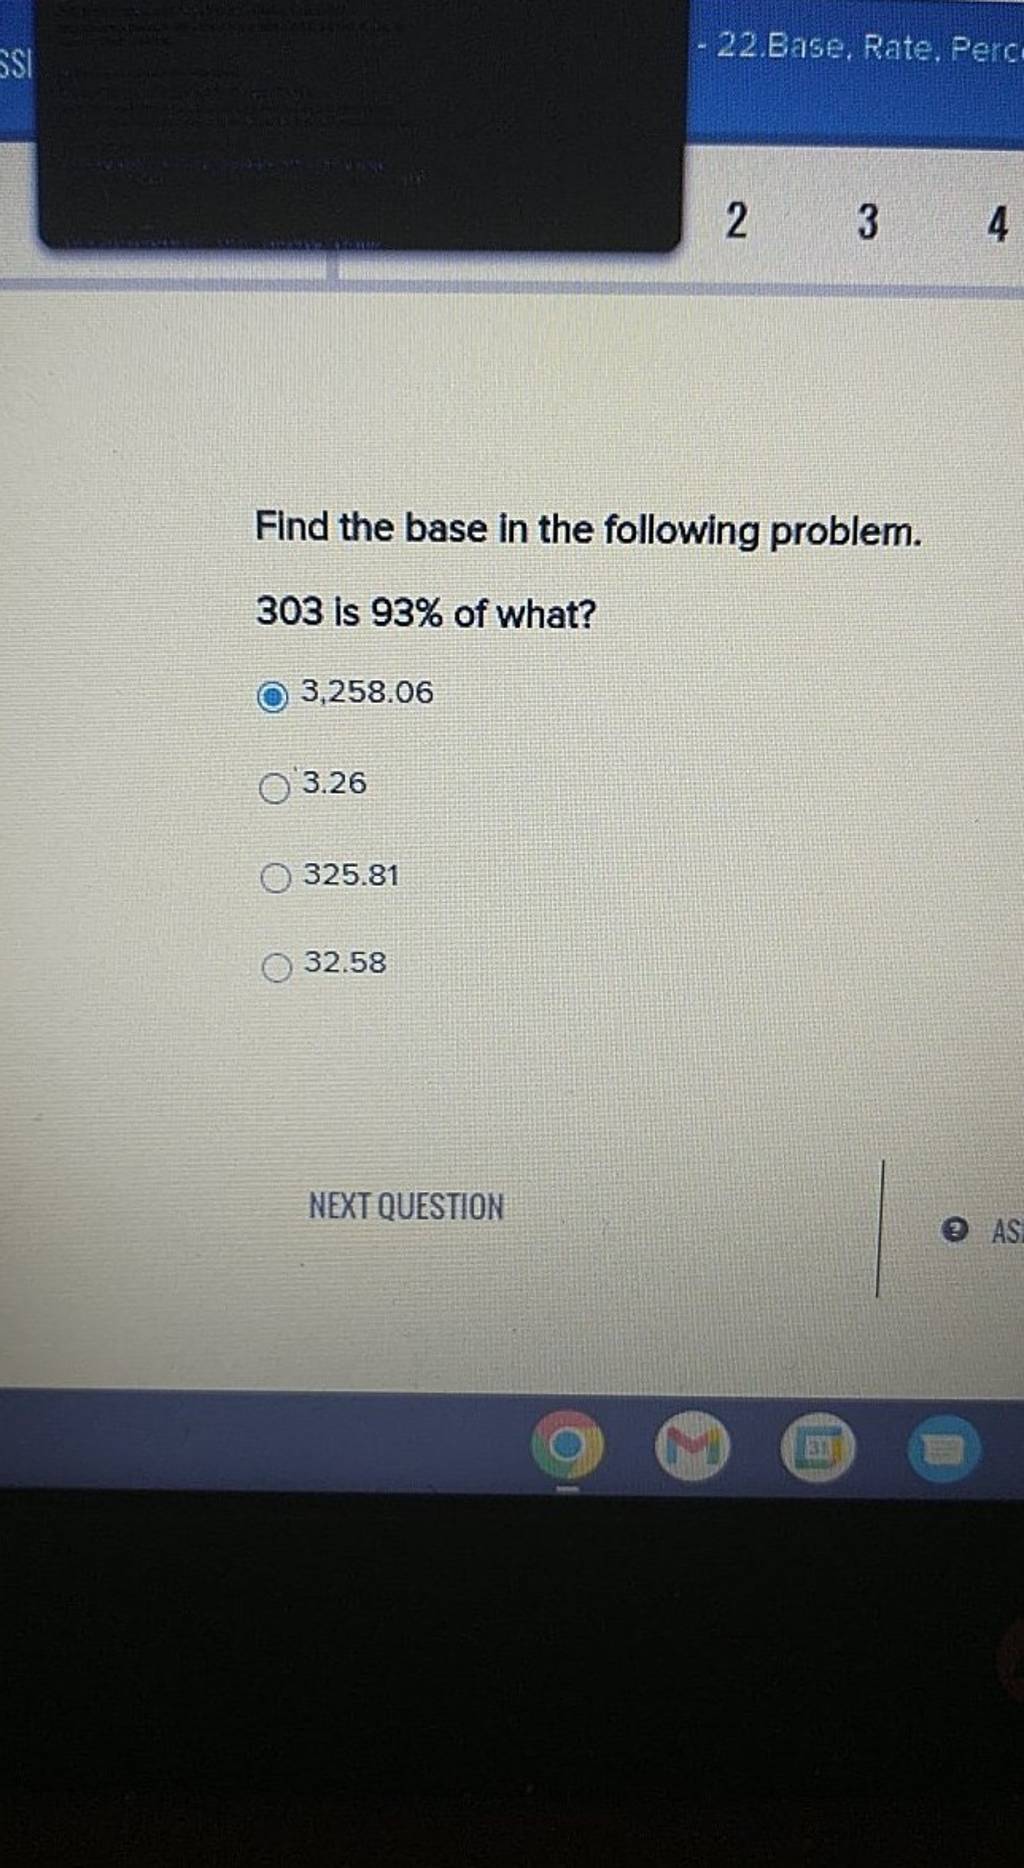 Find the base in the following problem.
303 is 93% of what?
3,258.06
3